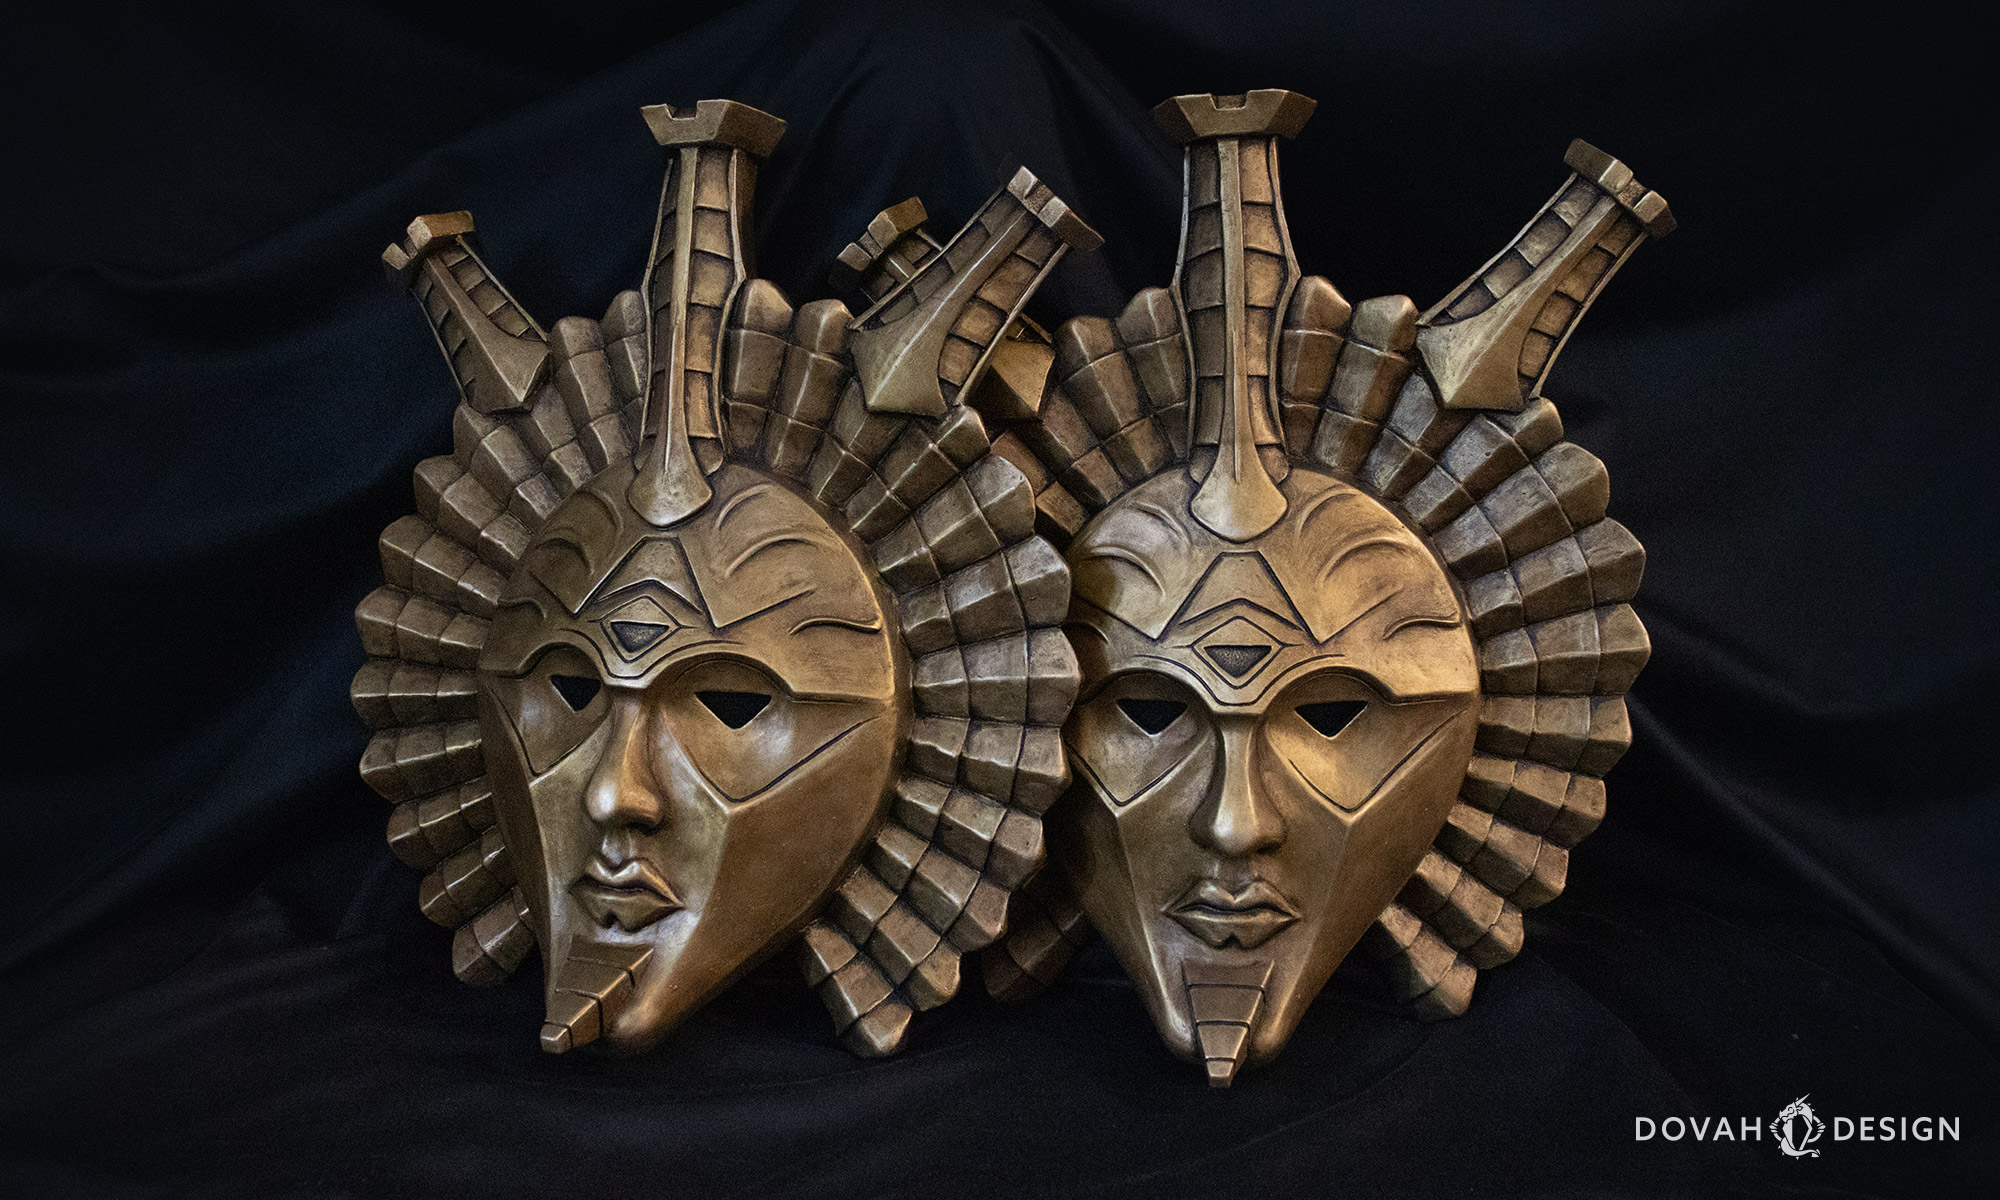 Two Dagoth Ur mask replicas, sitting upright on a table wit a black background.